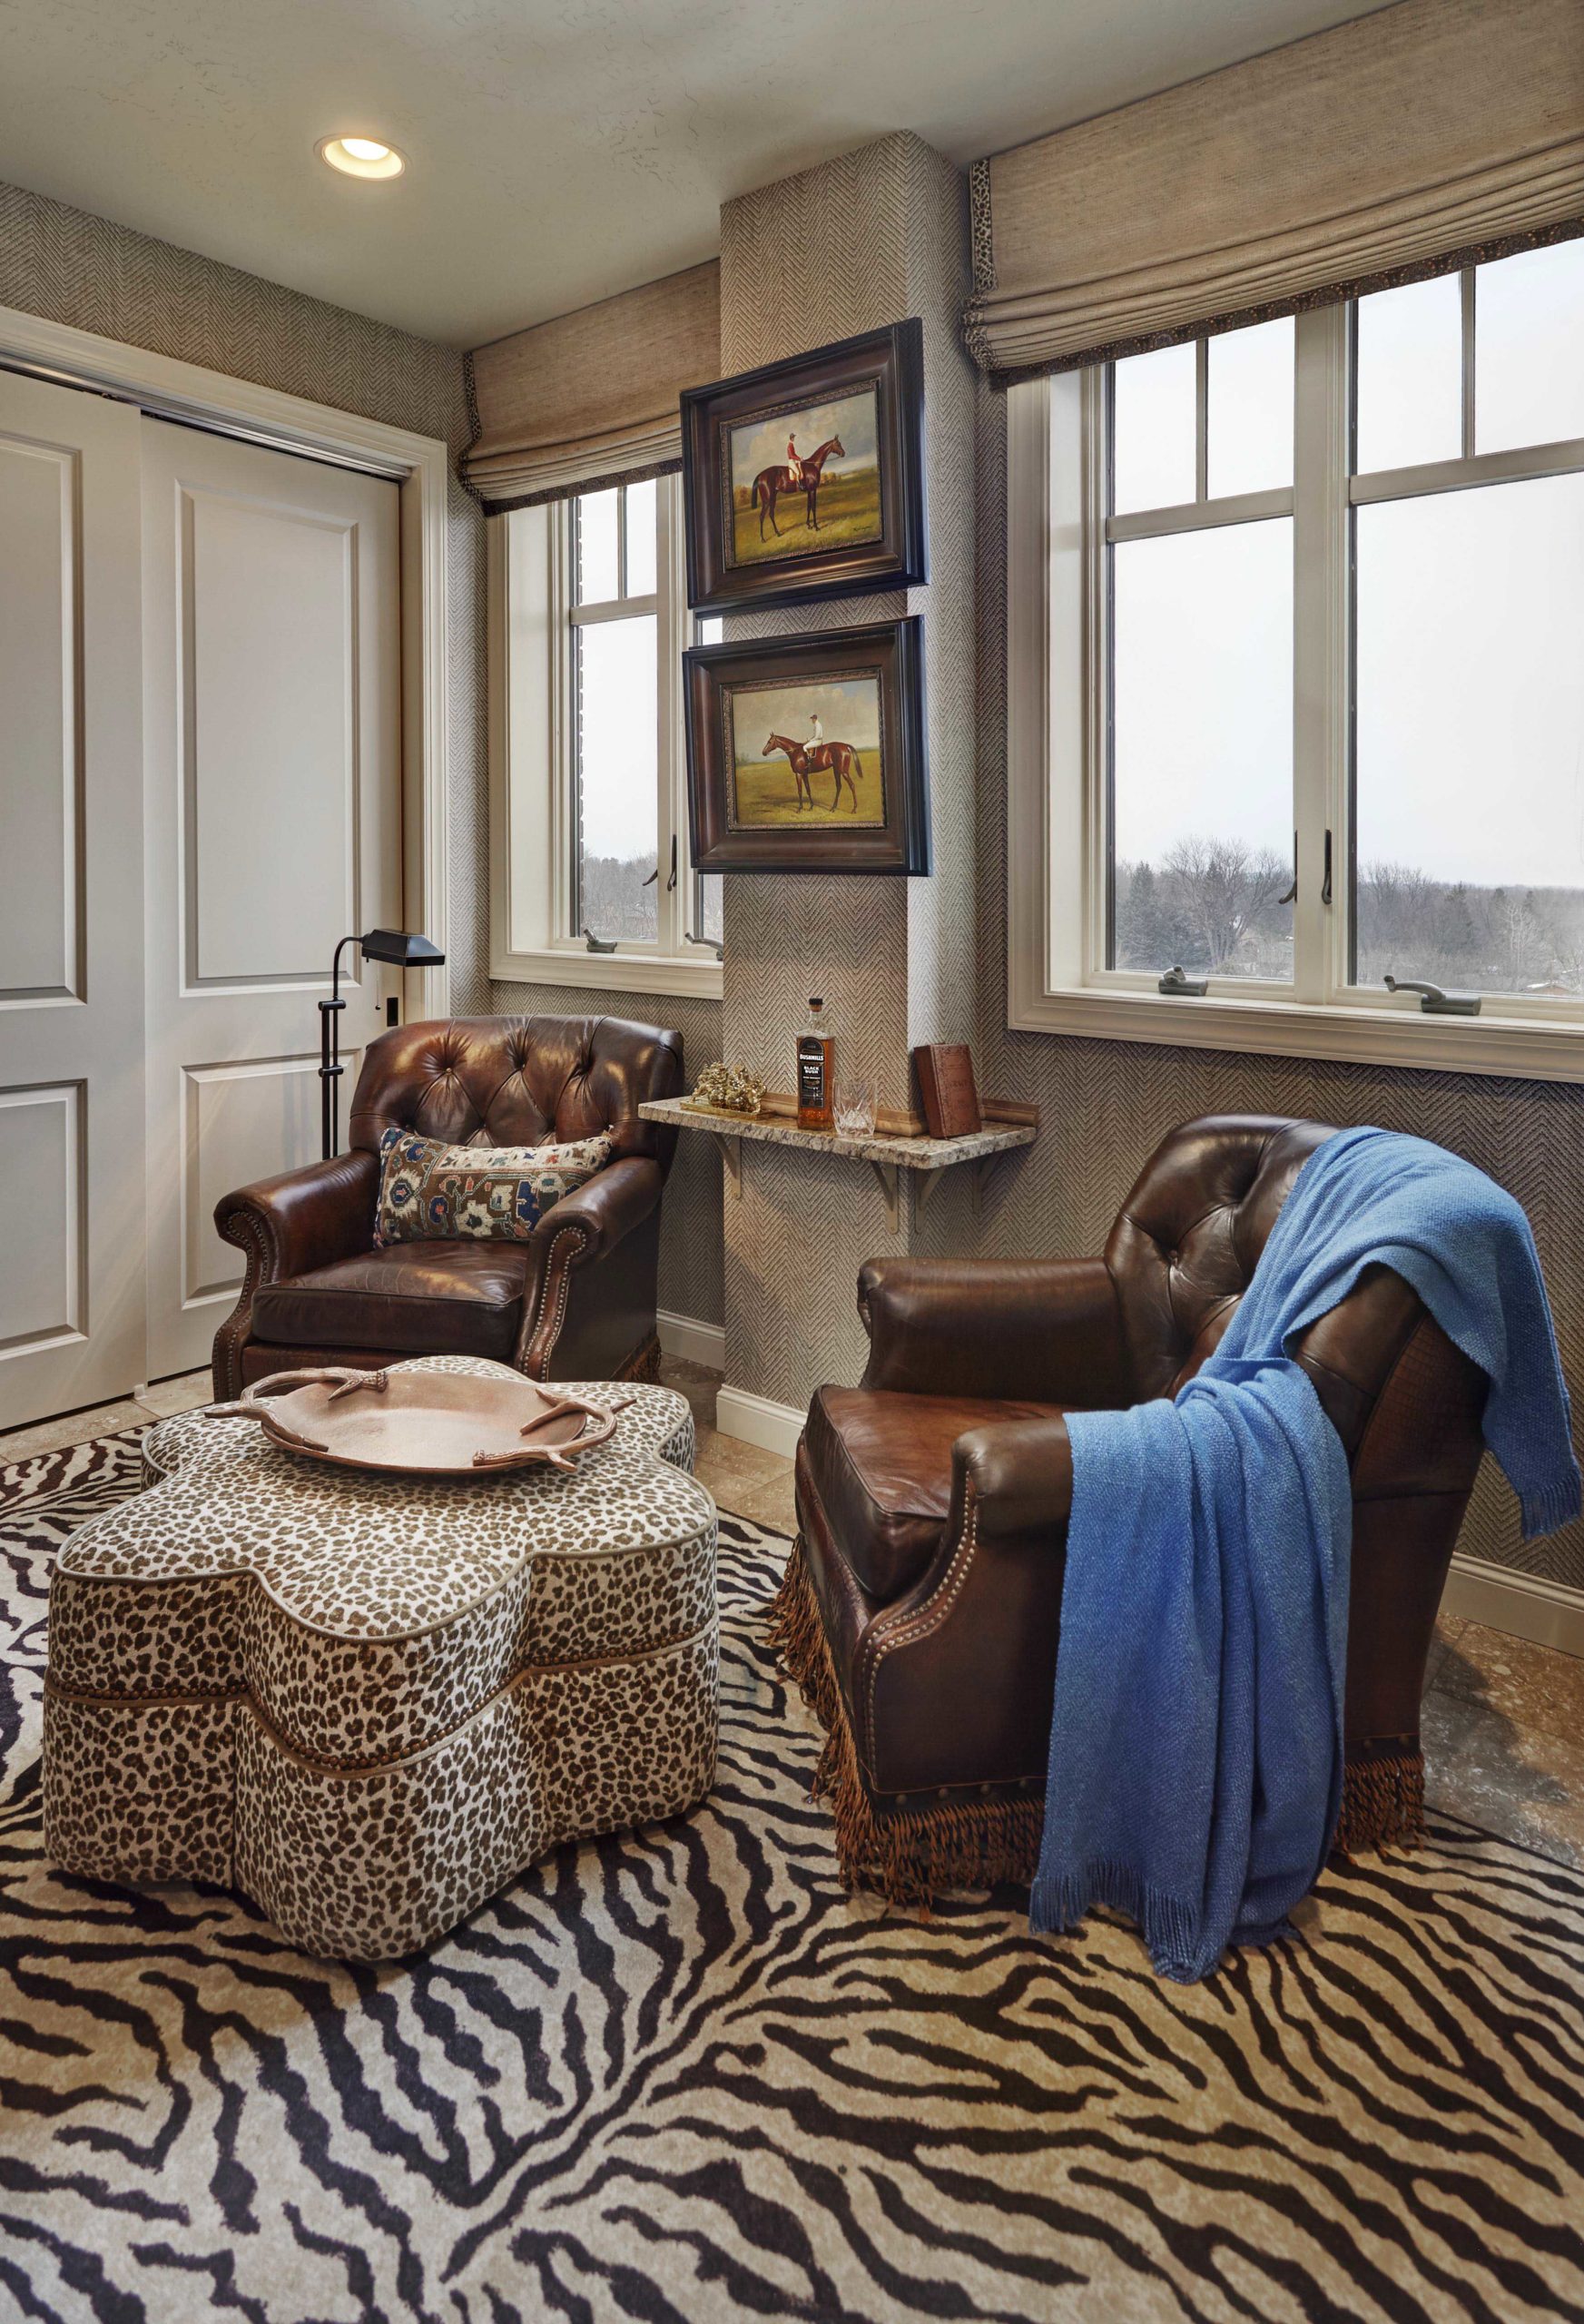 Corner of room with brown leather chairs and zebra rug